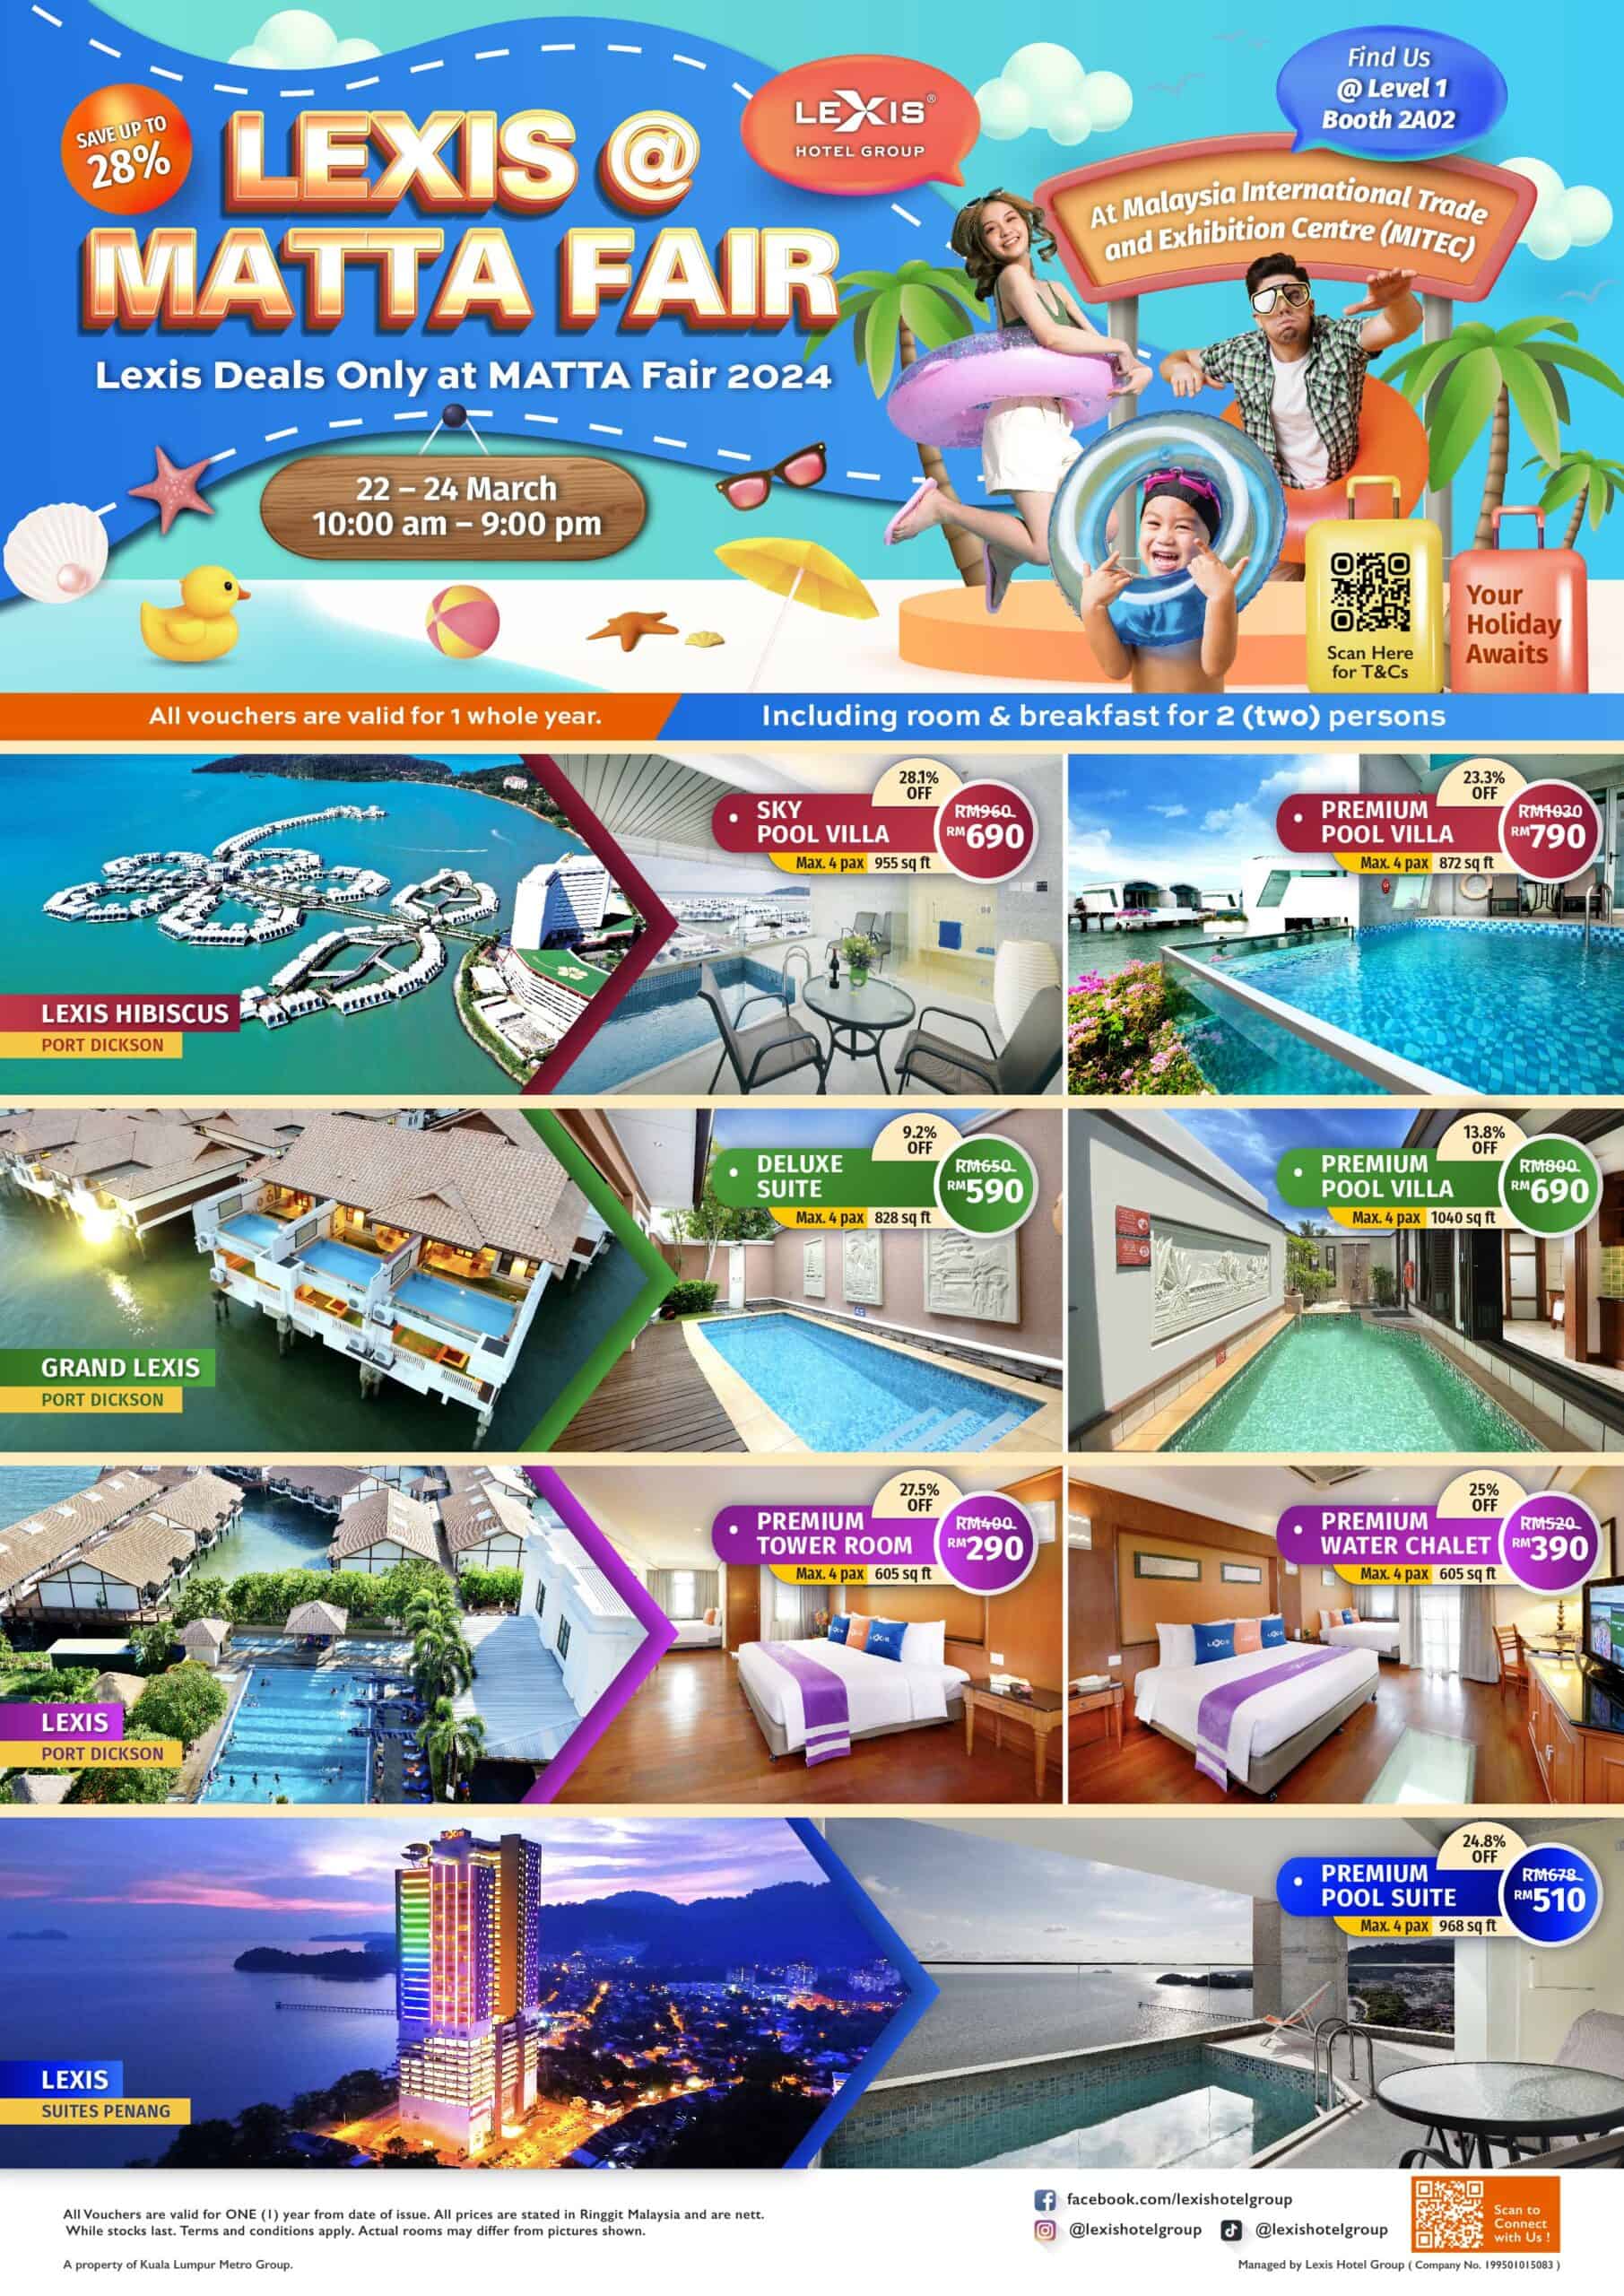 Lexis Hotels & Resorts Offers Unbeatable Savings of Up to 28% On Staycations at MATTA FAIR 2024